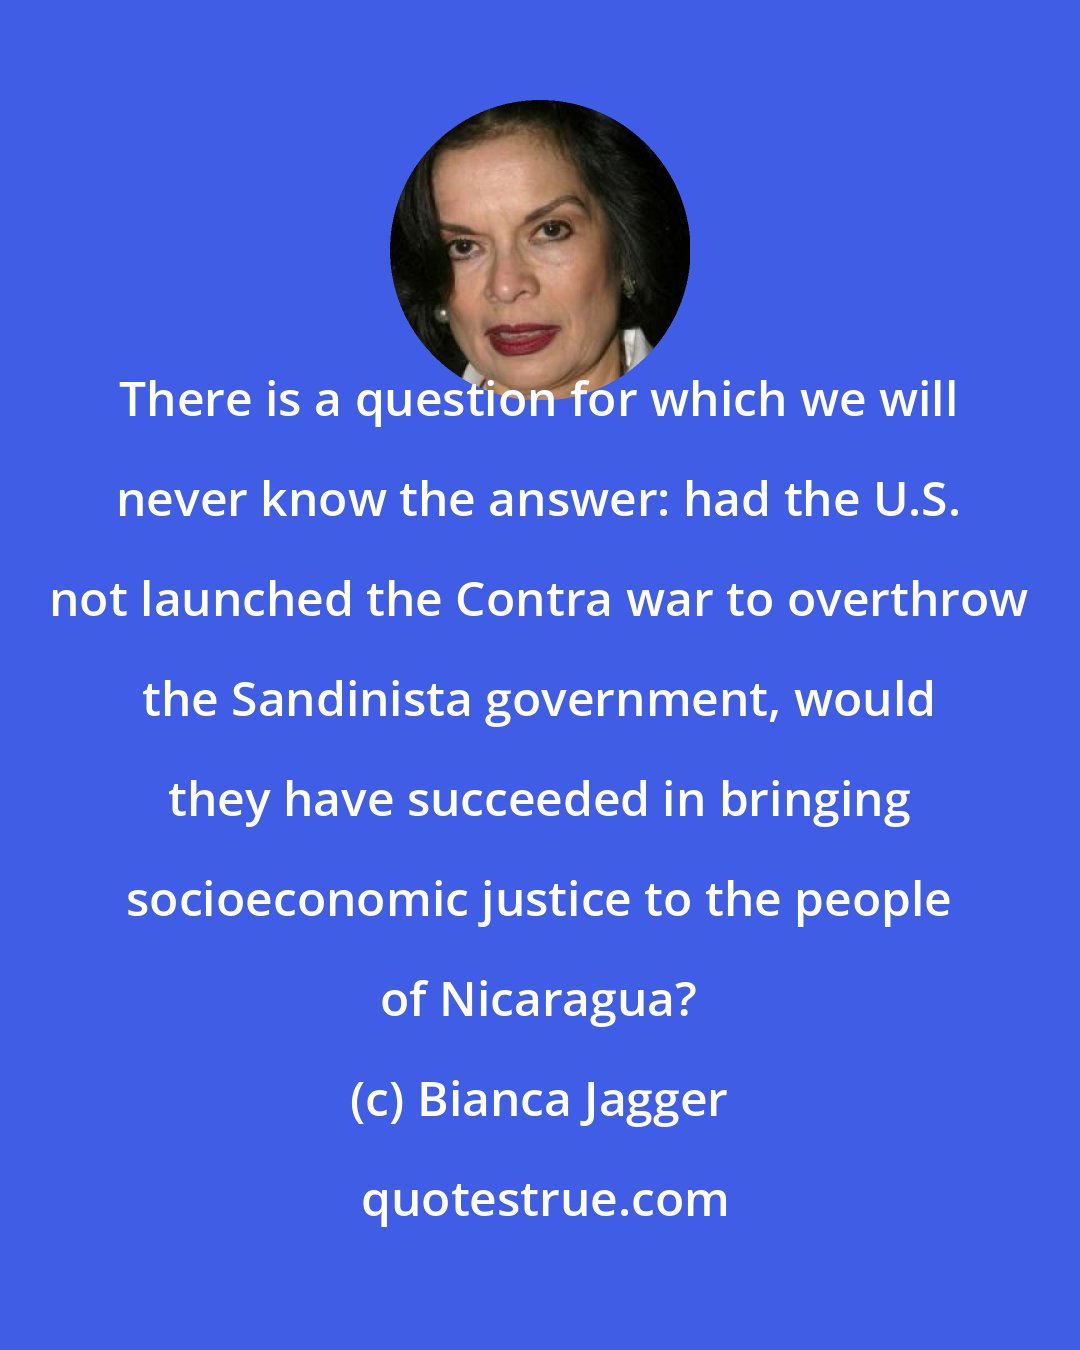 Bianca Jagger: There is a question for which we will never know the answer: had the U.S. not launched the Contra war to overthrow the Sandinista government, would they have succeeded in bringing socioeconomic justice to the people of Nicaragua?